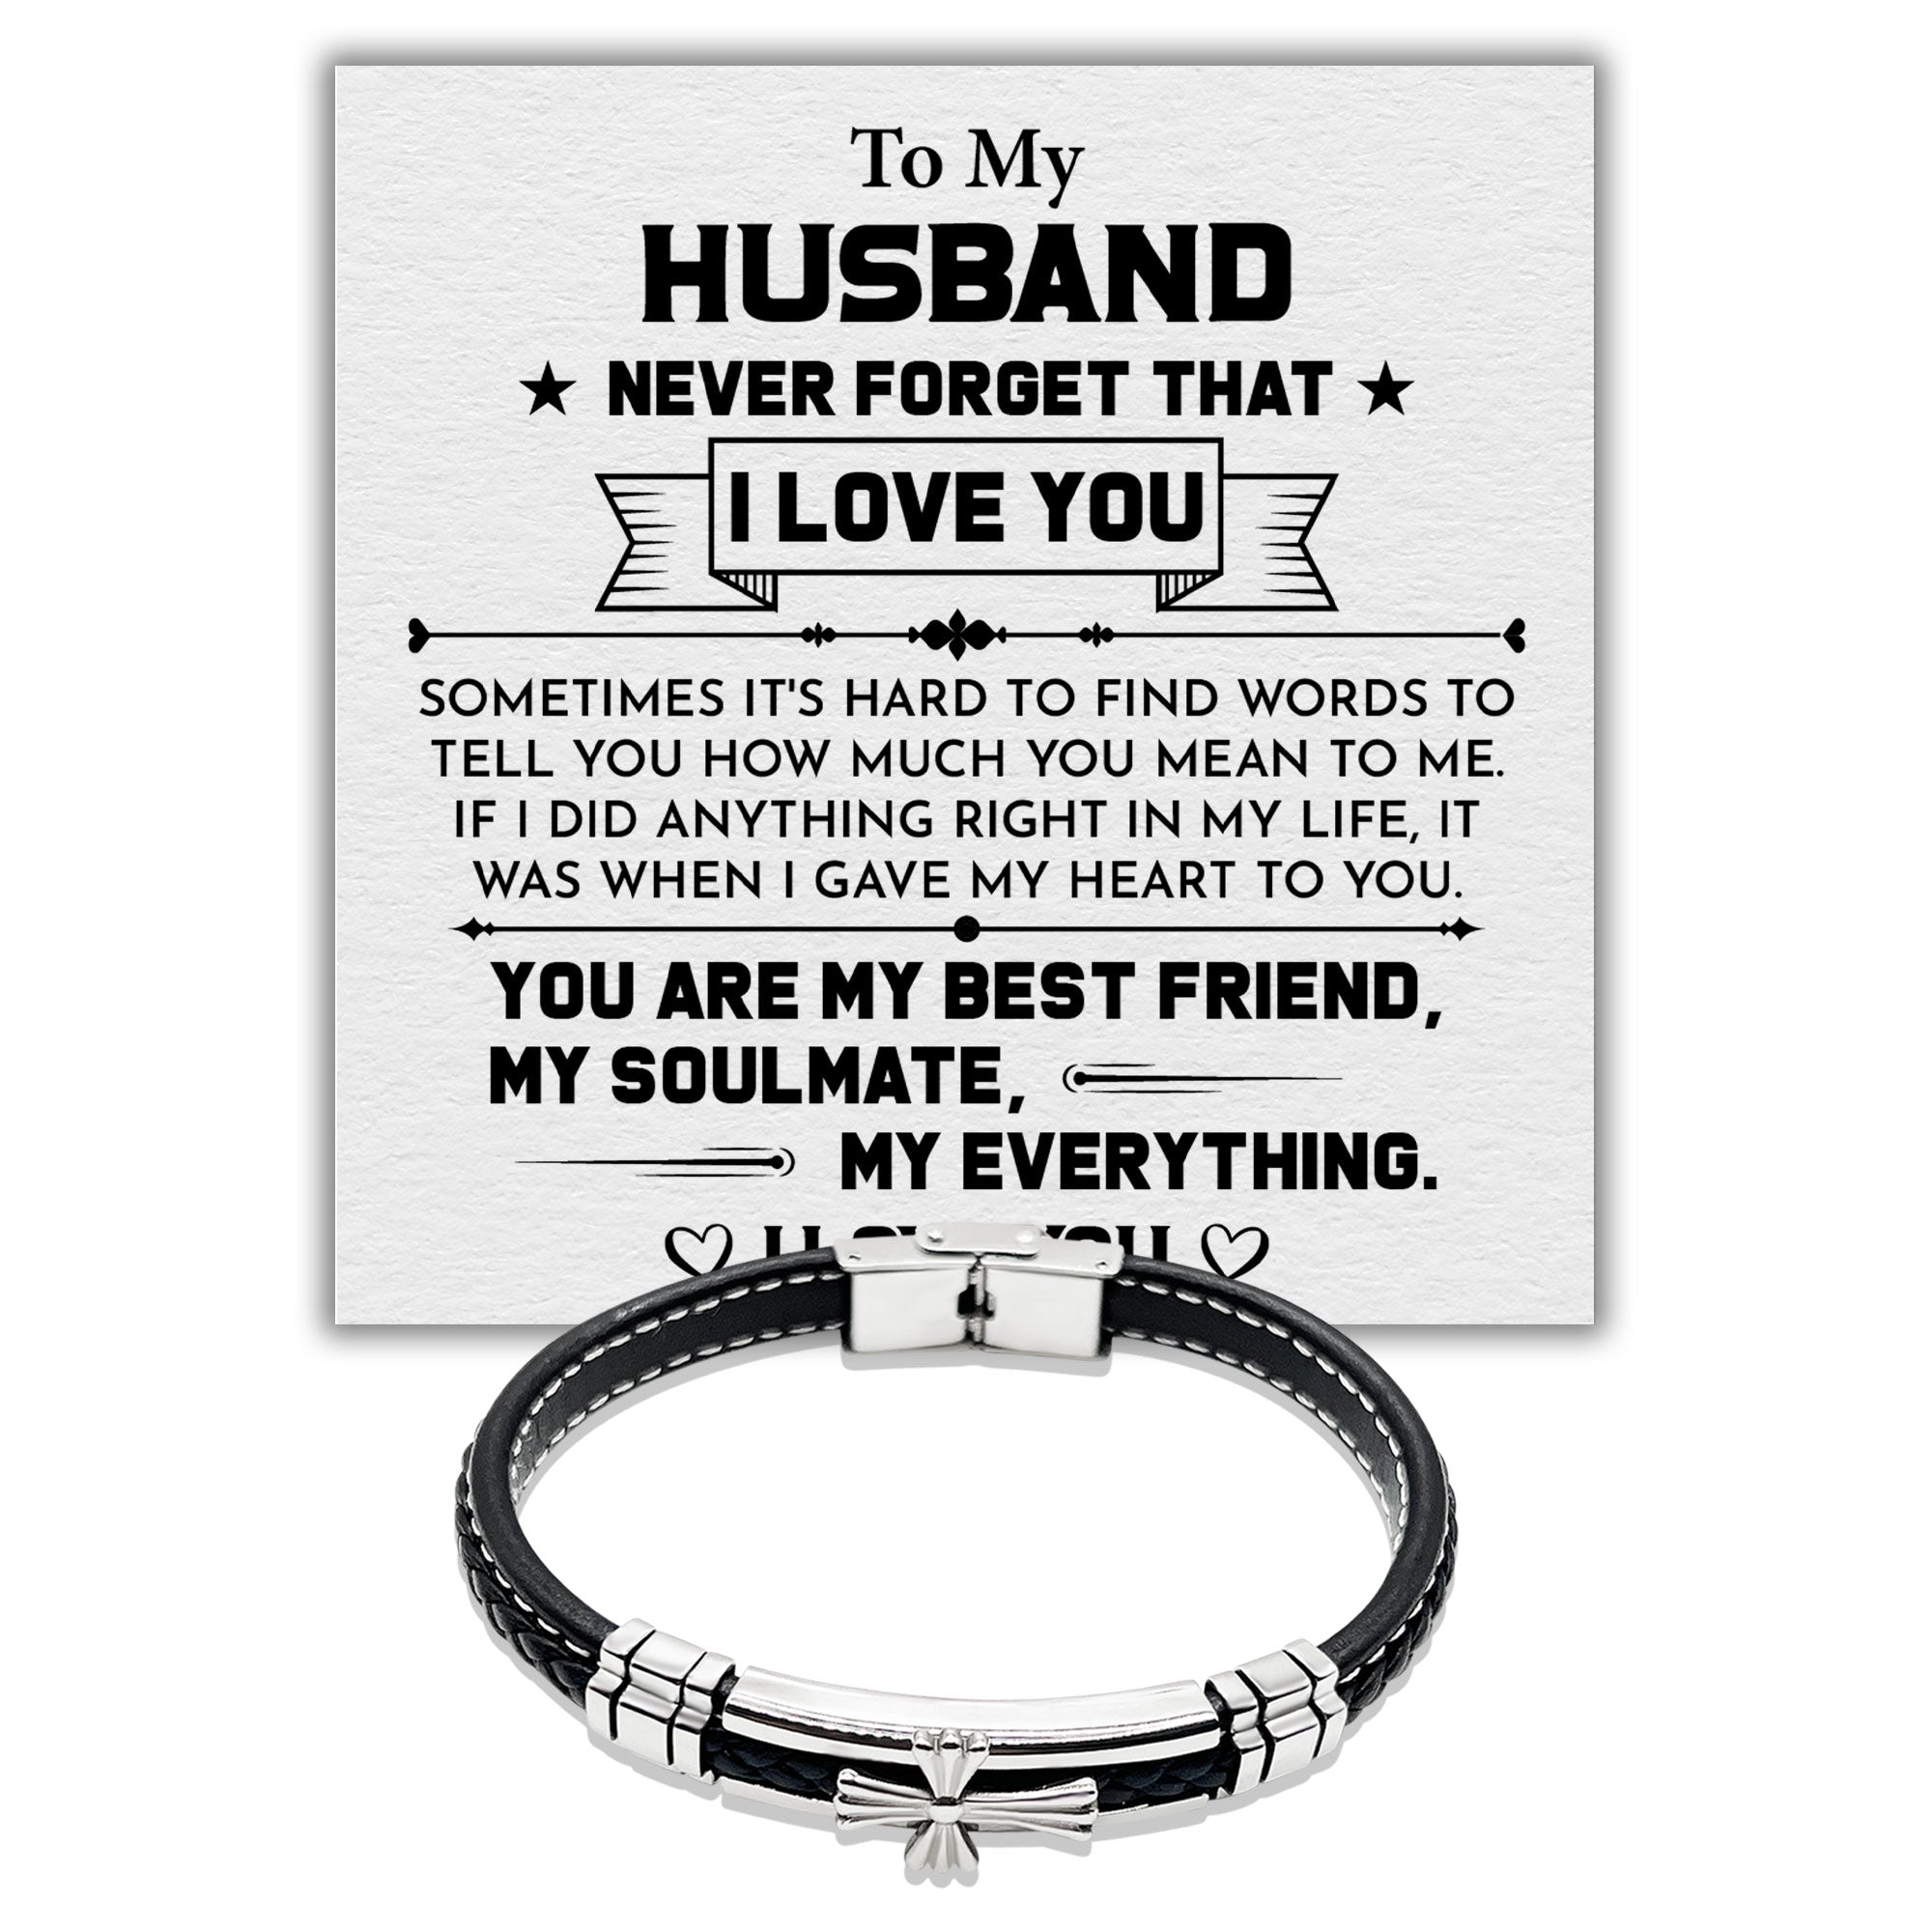 To my Husband Never forget That I Love You - Premium Stainless Steel Celtic Cross Black Italian Leather Bracelet